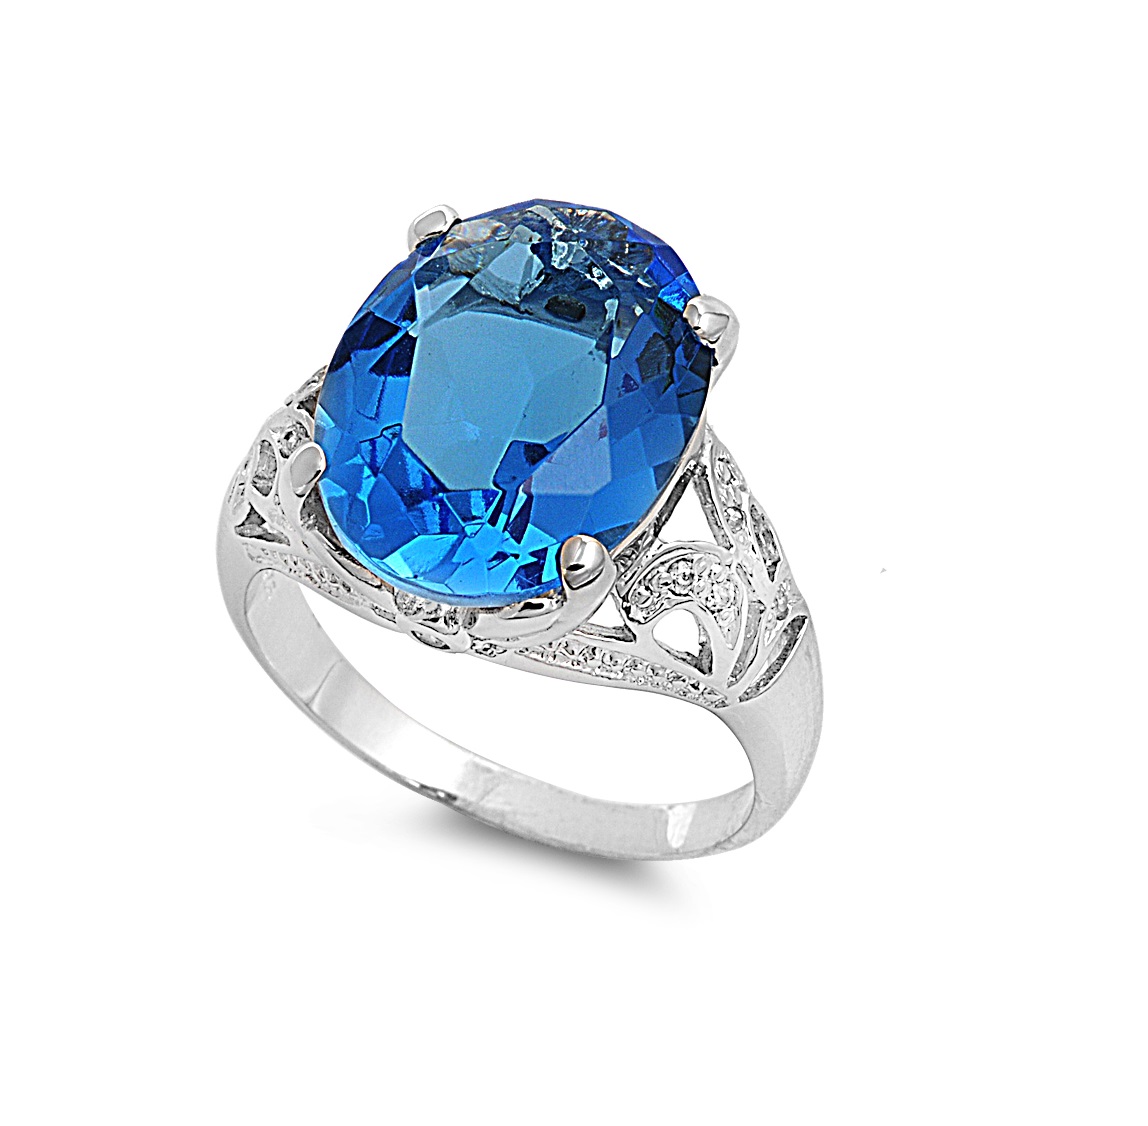 AllinStock Oval Blue Simulated Topaz Cubic Zirconia Ring Sterling Silver 925 